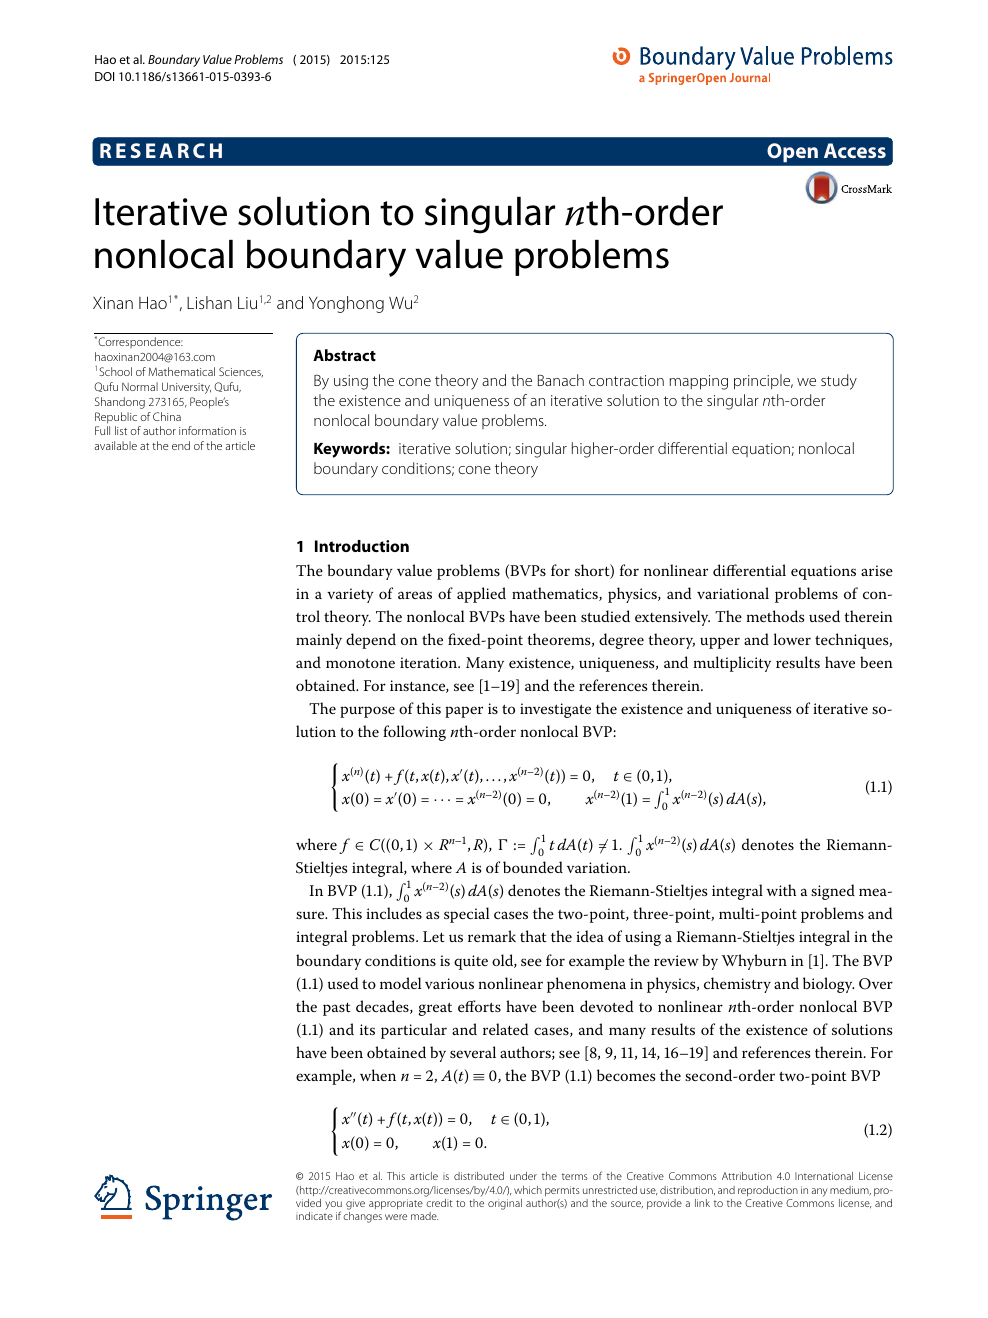 Iterative Solution To Singular Nth Order Nonlocal Boundary Value Problems Topic Of Research Paper In Mathematics Download Scholarly Article Pdf And Read For Free On Cyberleninka Open Science Hub